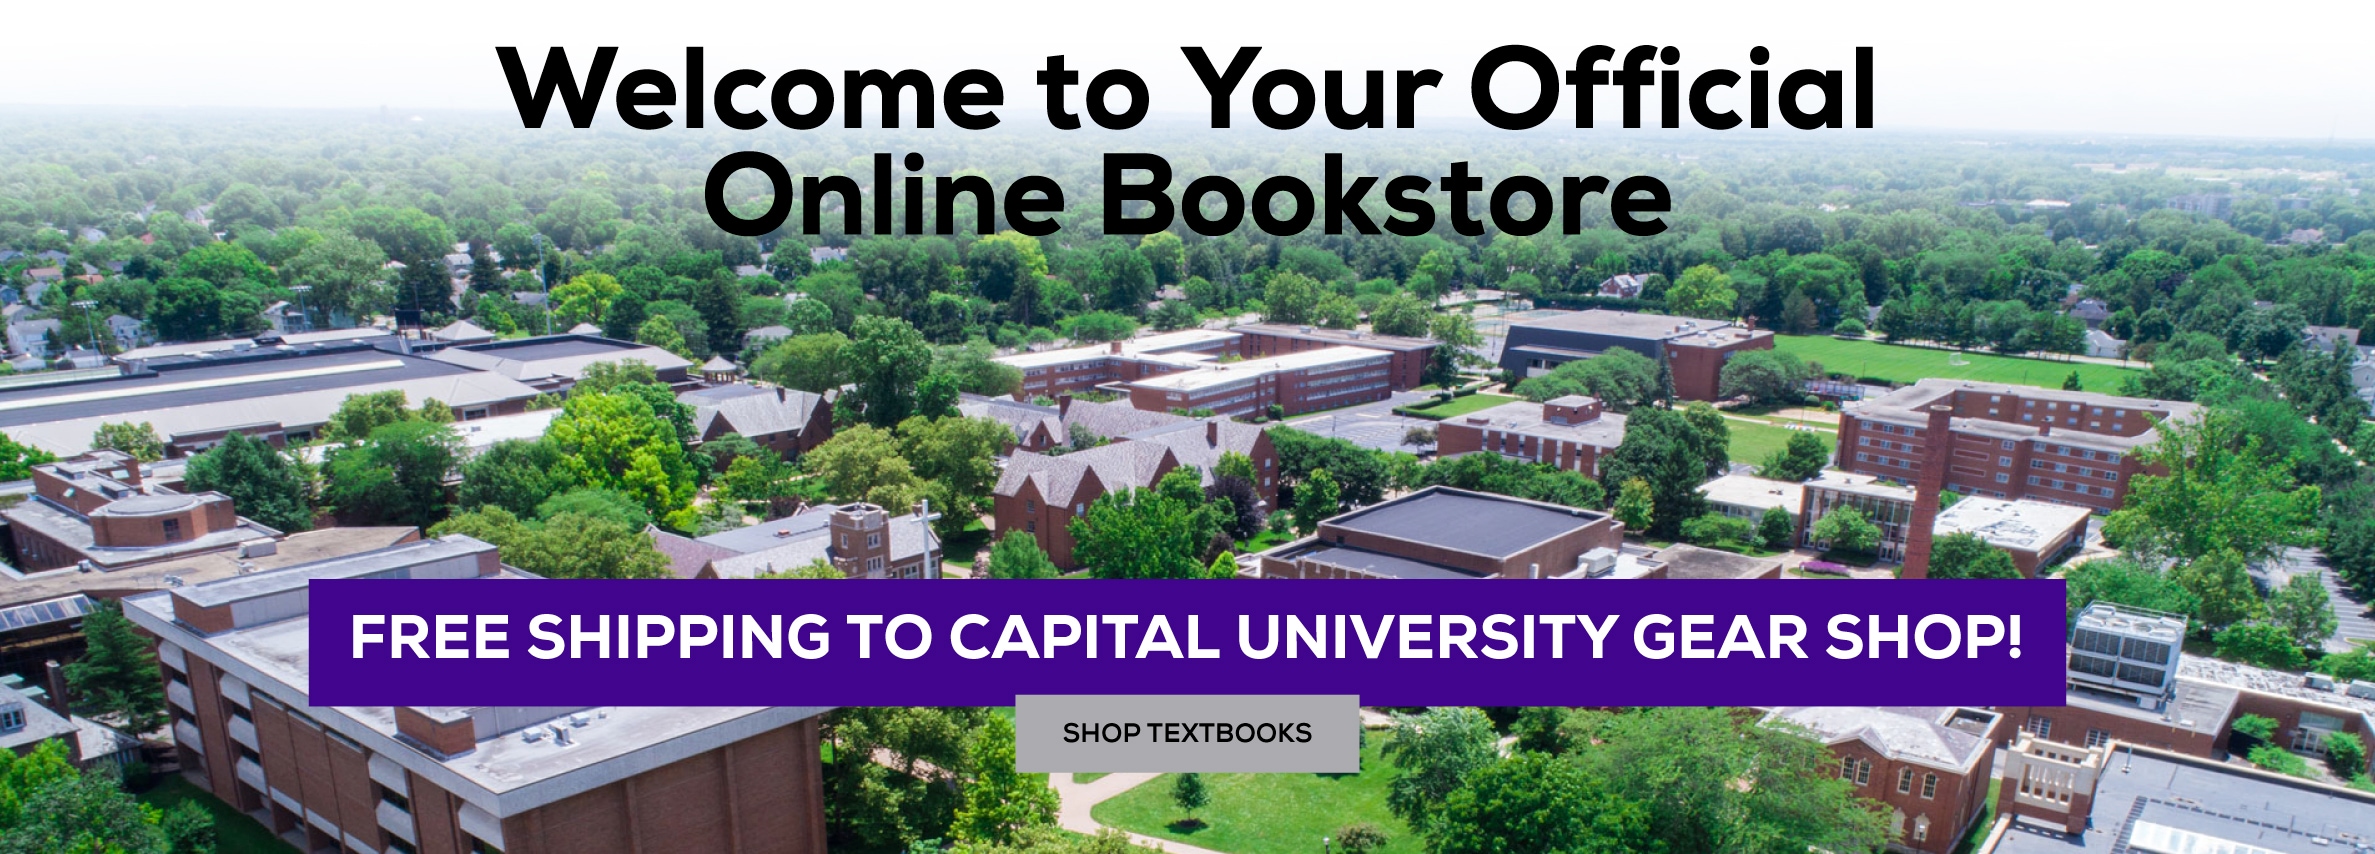 Welcome to Your Official Online Bookstore Free Shipping to Capital University Gear Shop